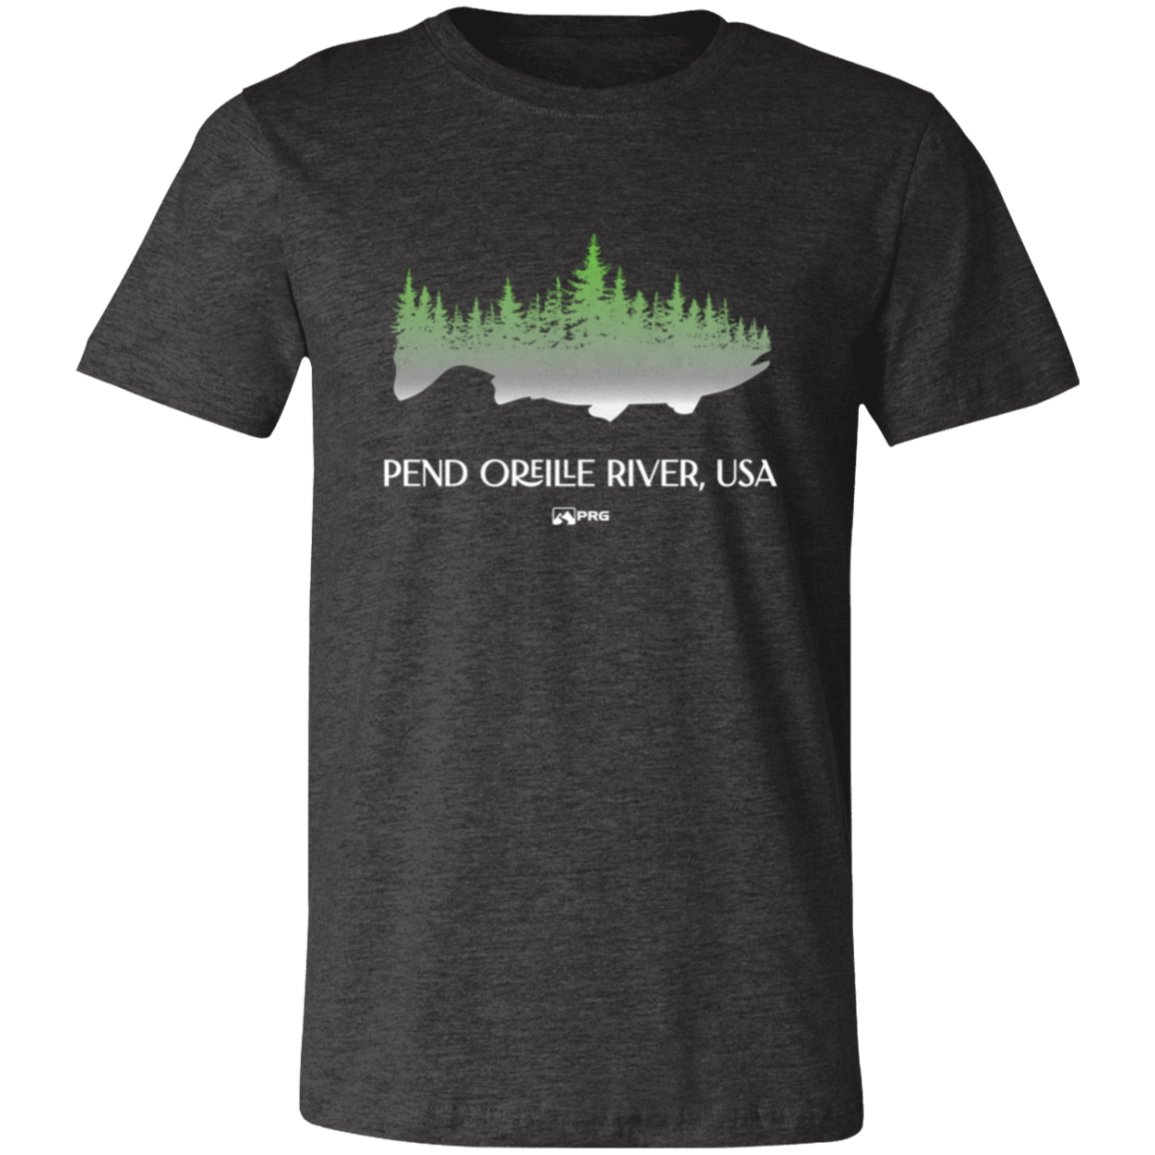 Forests & Fish - Shirt